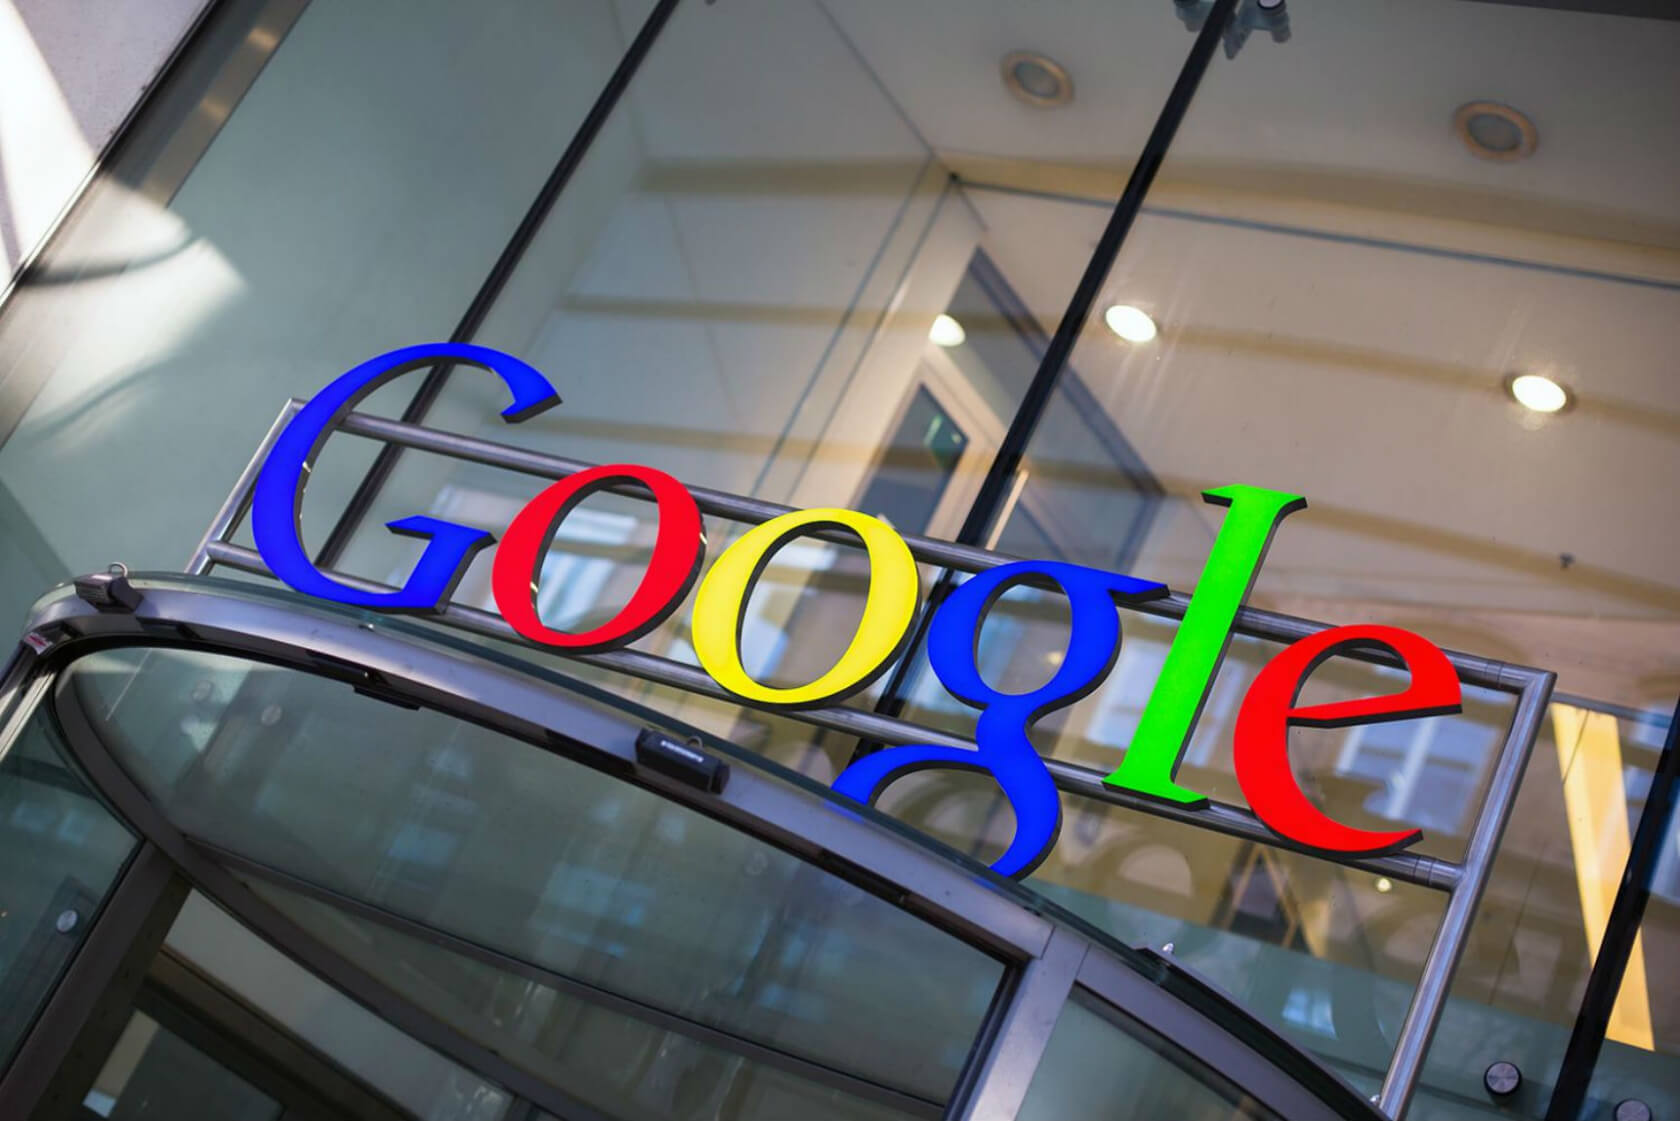 Google-funded think tank fires member after he criticizes the tech giant